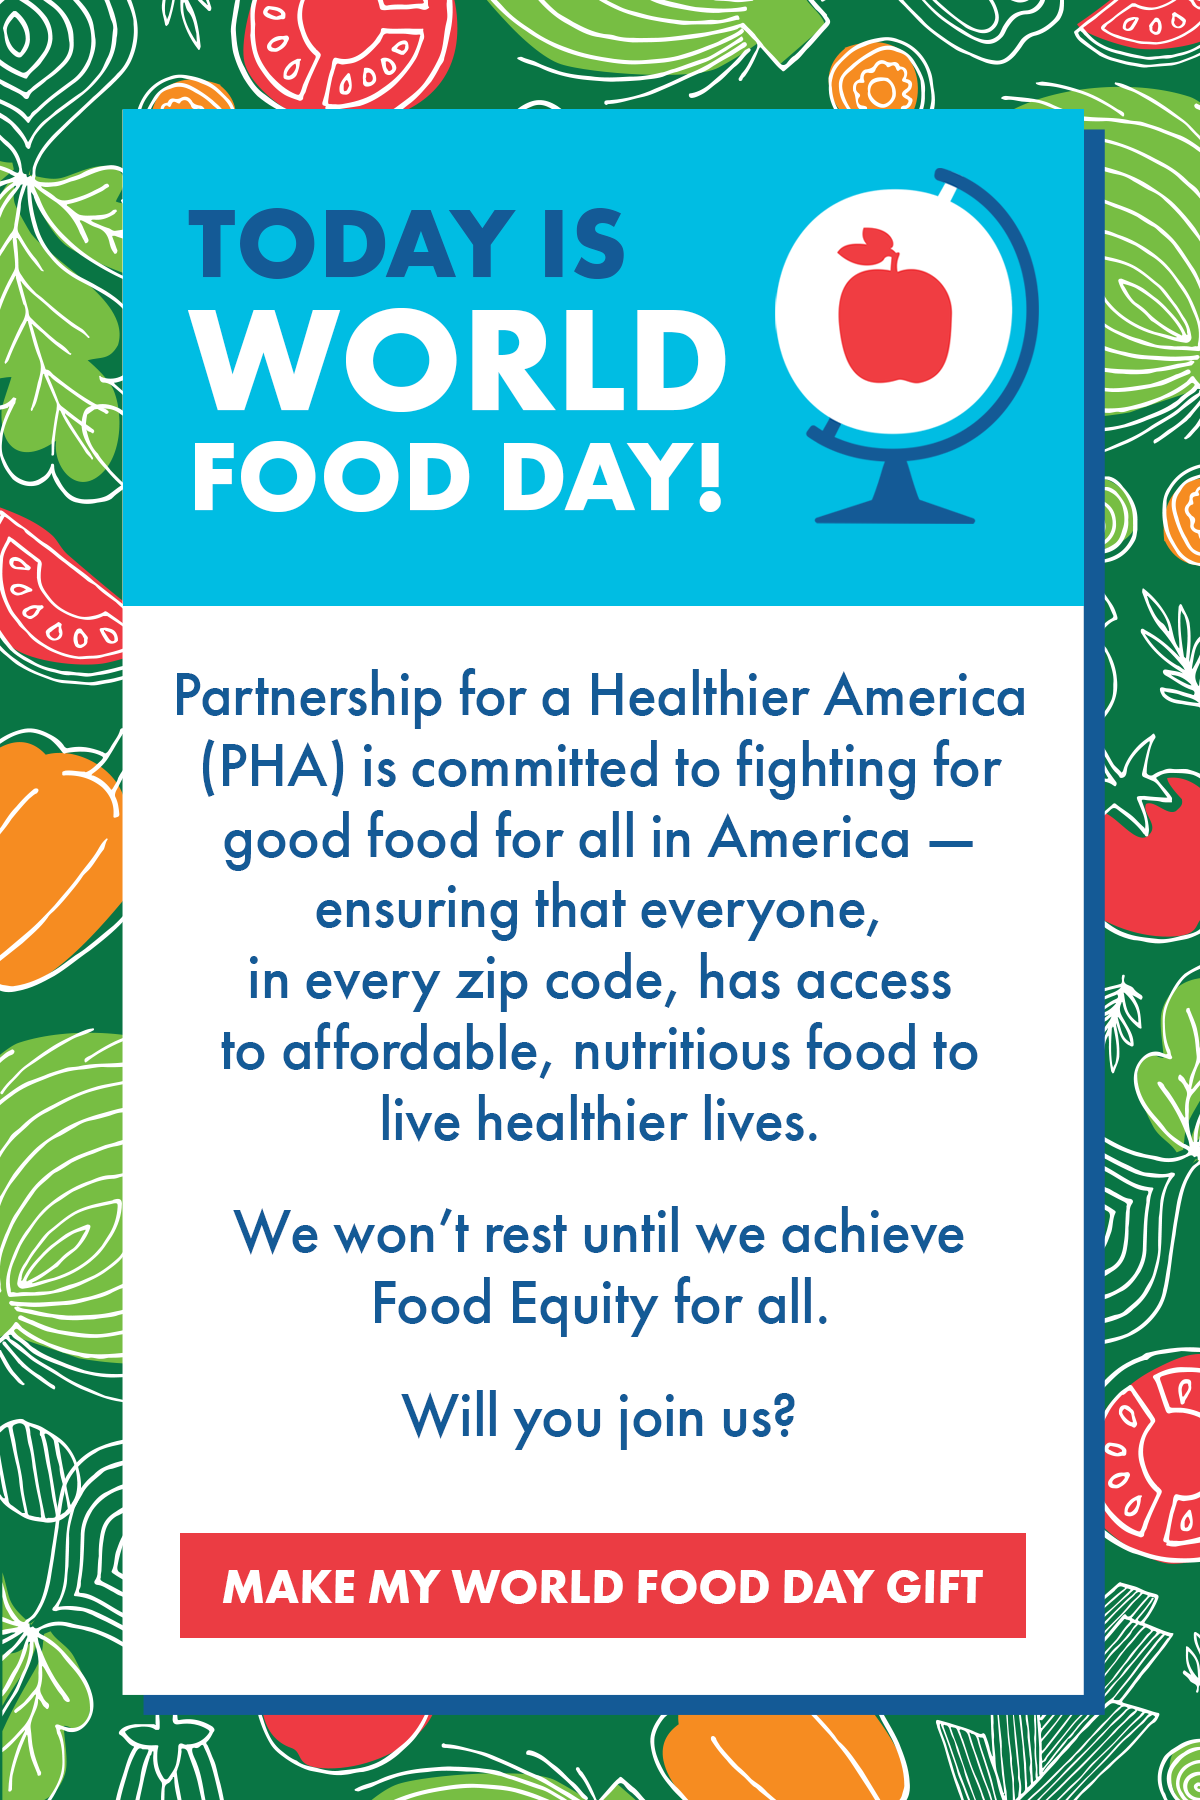 Today is World Food Day! Partnership for a Healthier America (PHA) is committed to fighting for good food for all in America - ensuring that everyone, in every zip code, has access to affordable, nutritious food to live healthier lives. We won't rest until we achieve Food Equity for all. Will you join us? MAKE MY WORLD FOOD DAY GIFT